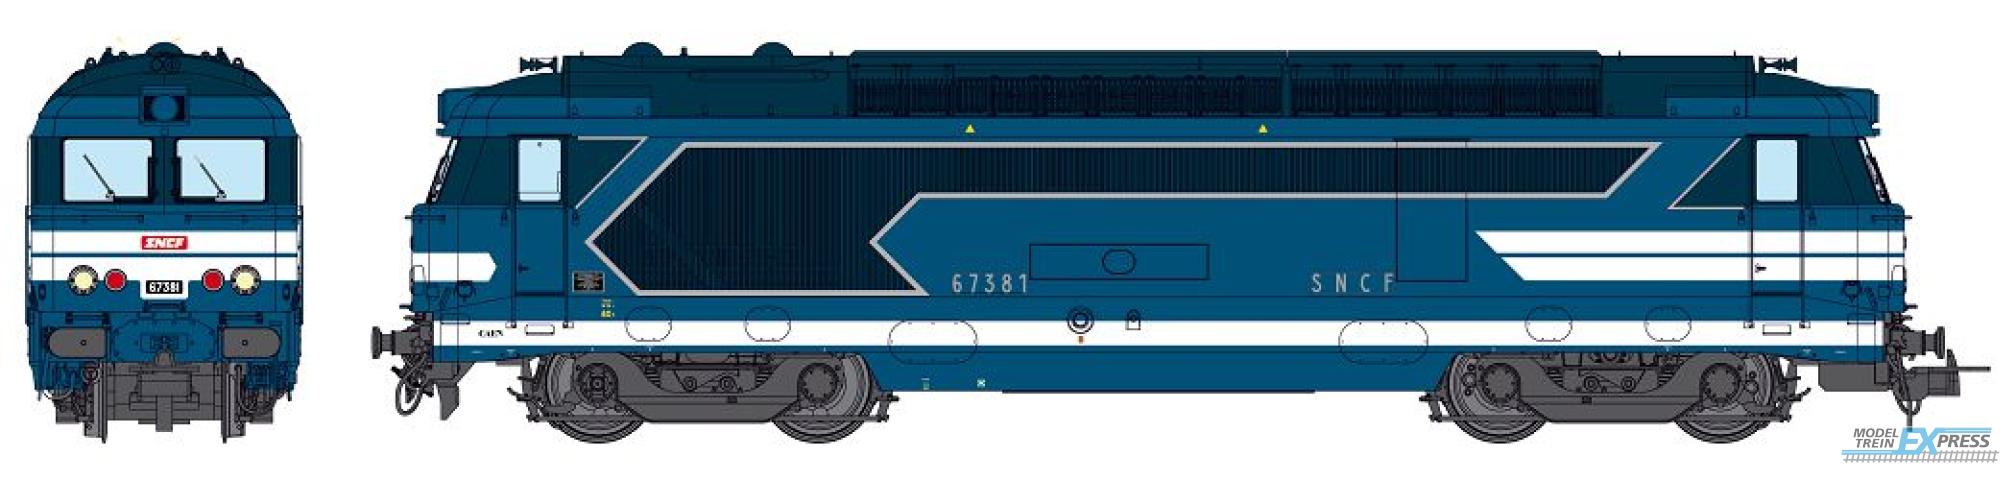 REE models MB-151S BB 67381 CAEN depot  Louvers and additional red headligths Era IV - DCC Sound & Smoke